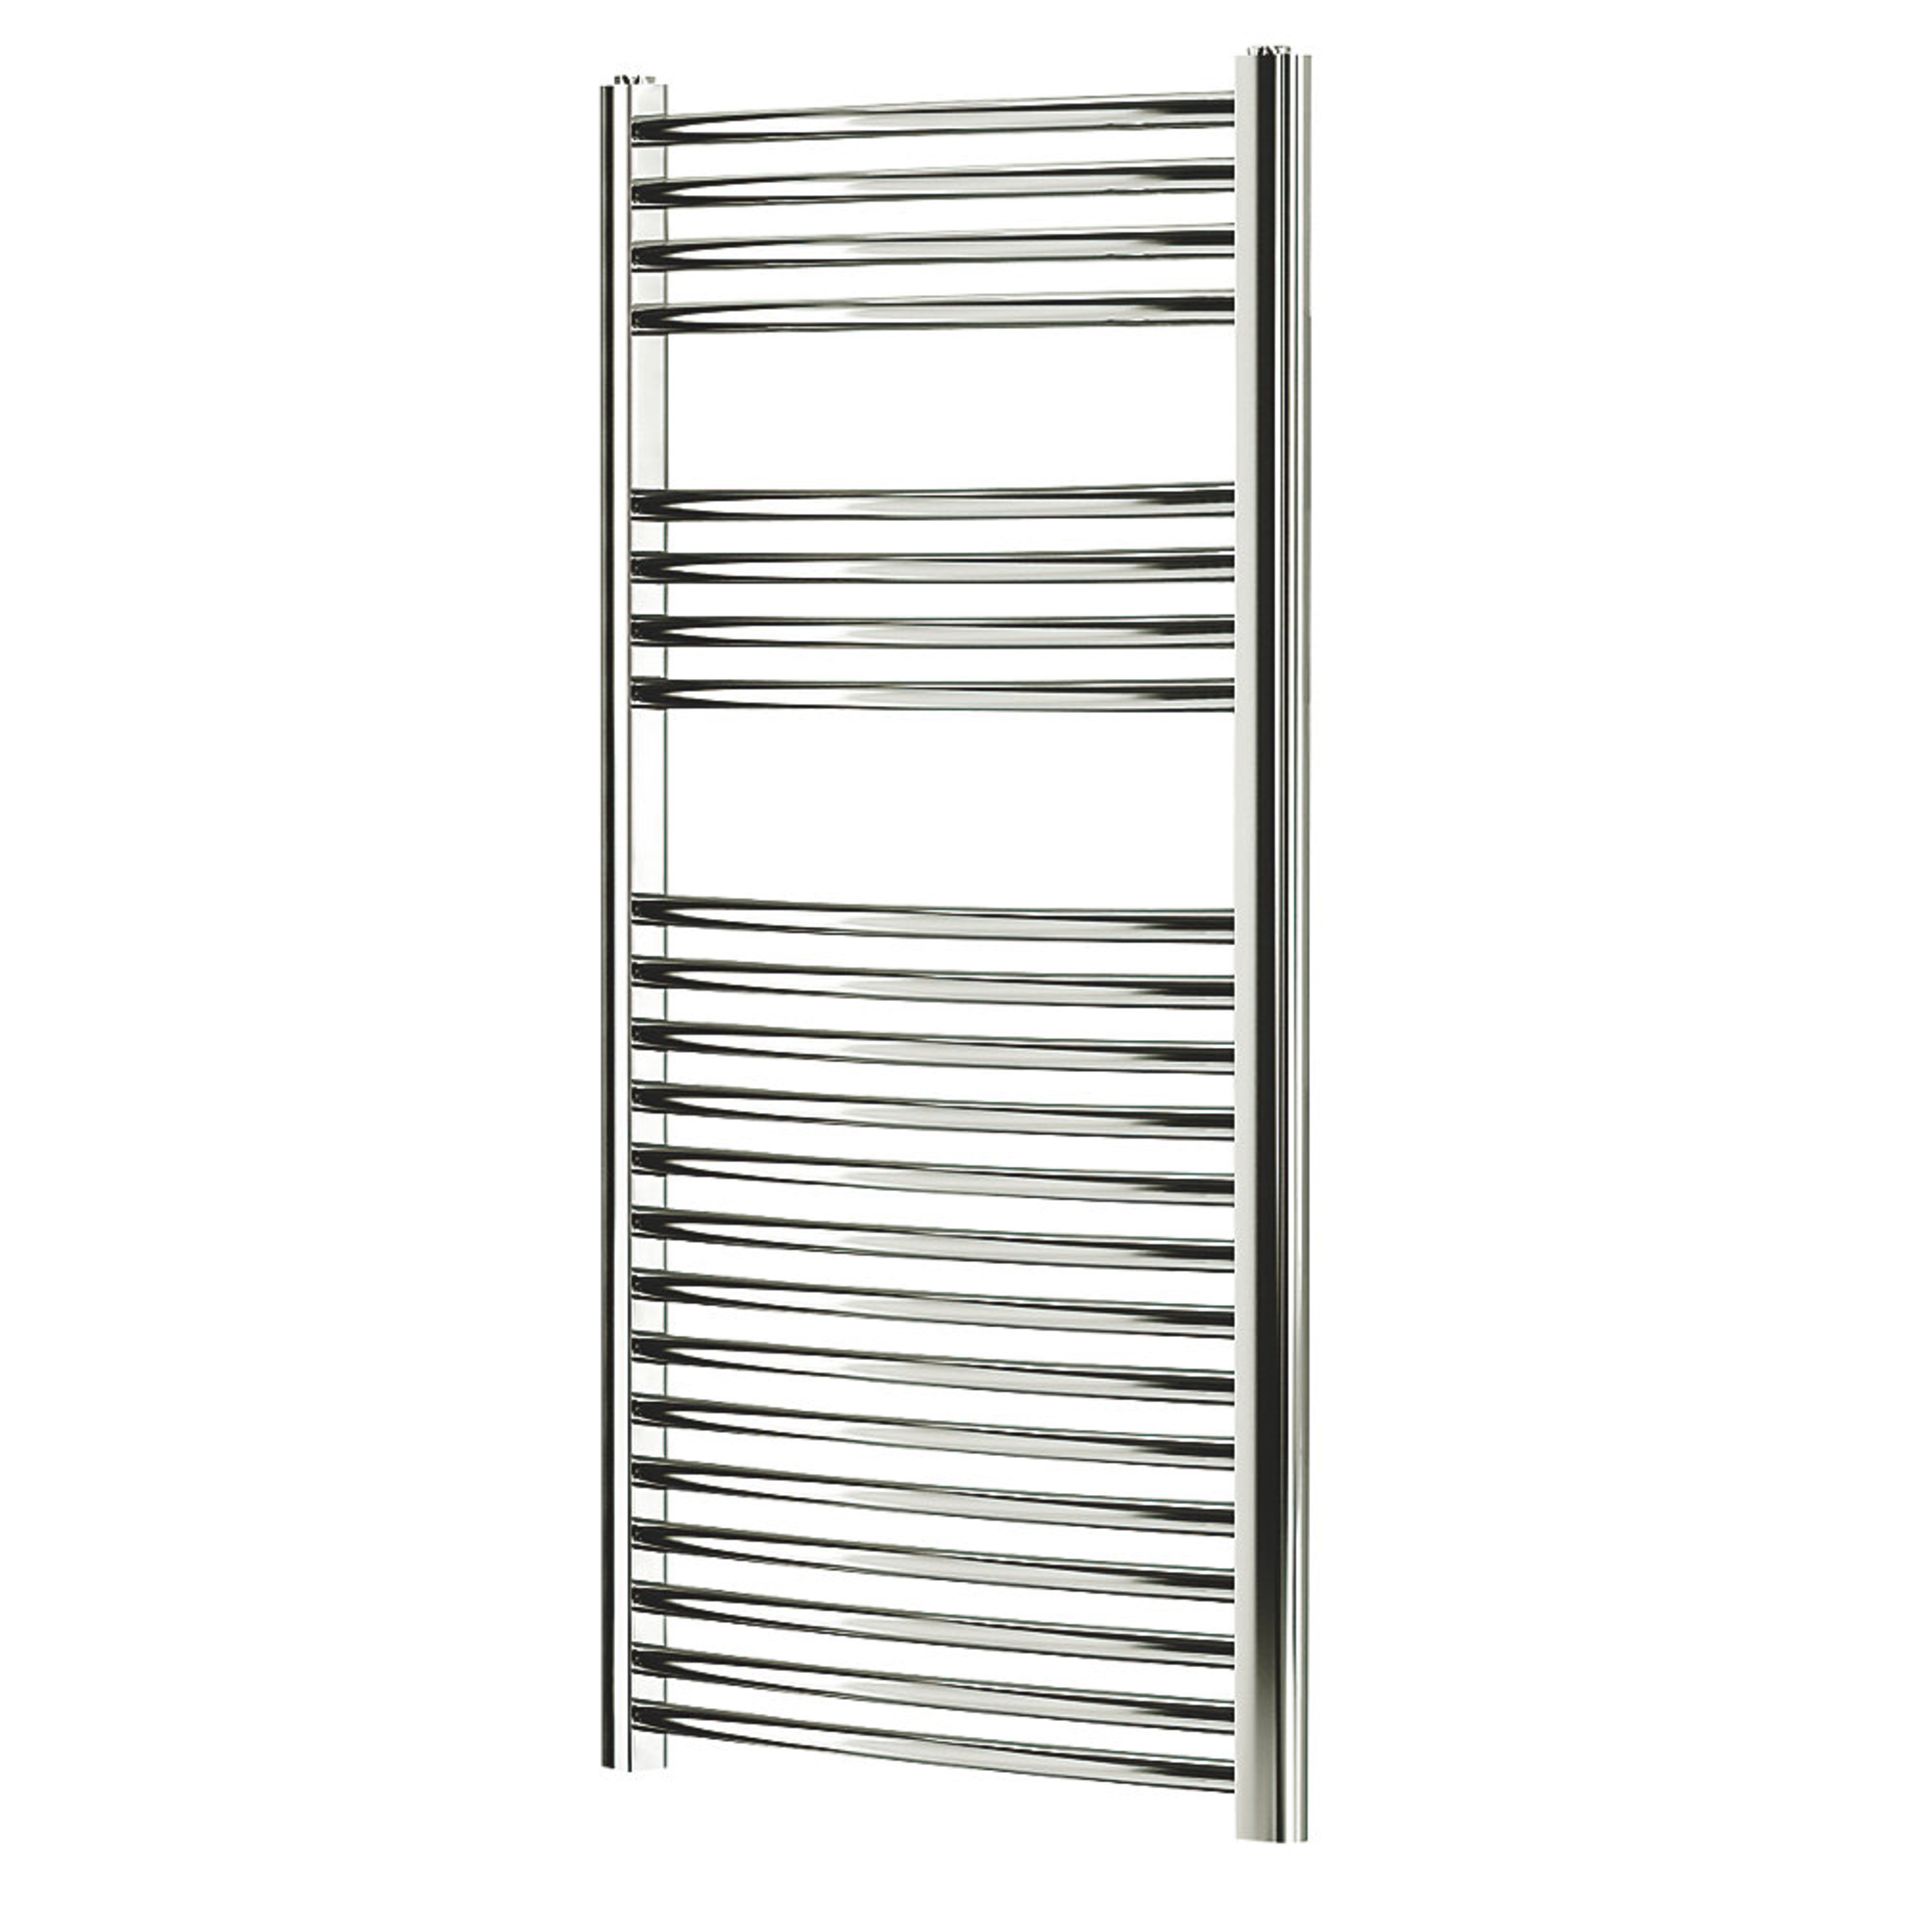 (Tt20) 1100X450Mm Curved Towel Radiator 1100 X 450Mm Chrome. Curved Chrome-Plated Steel Constr... - Image 2 of 2